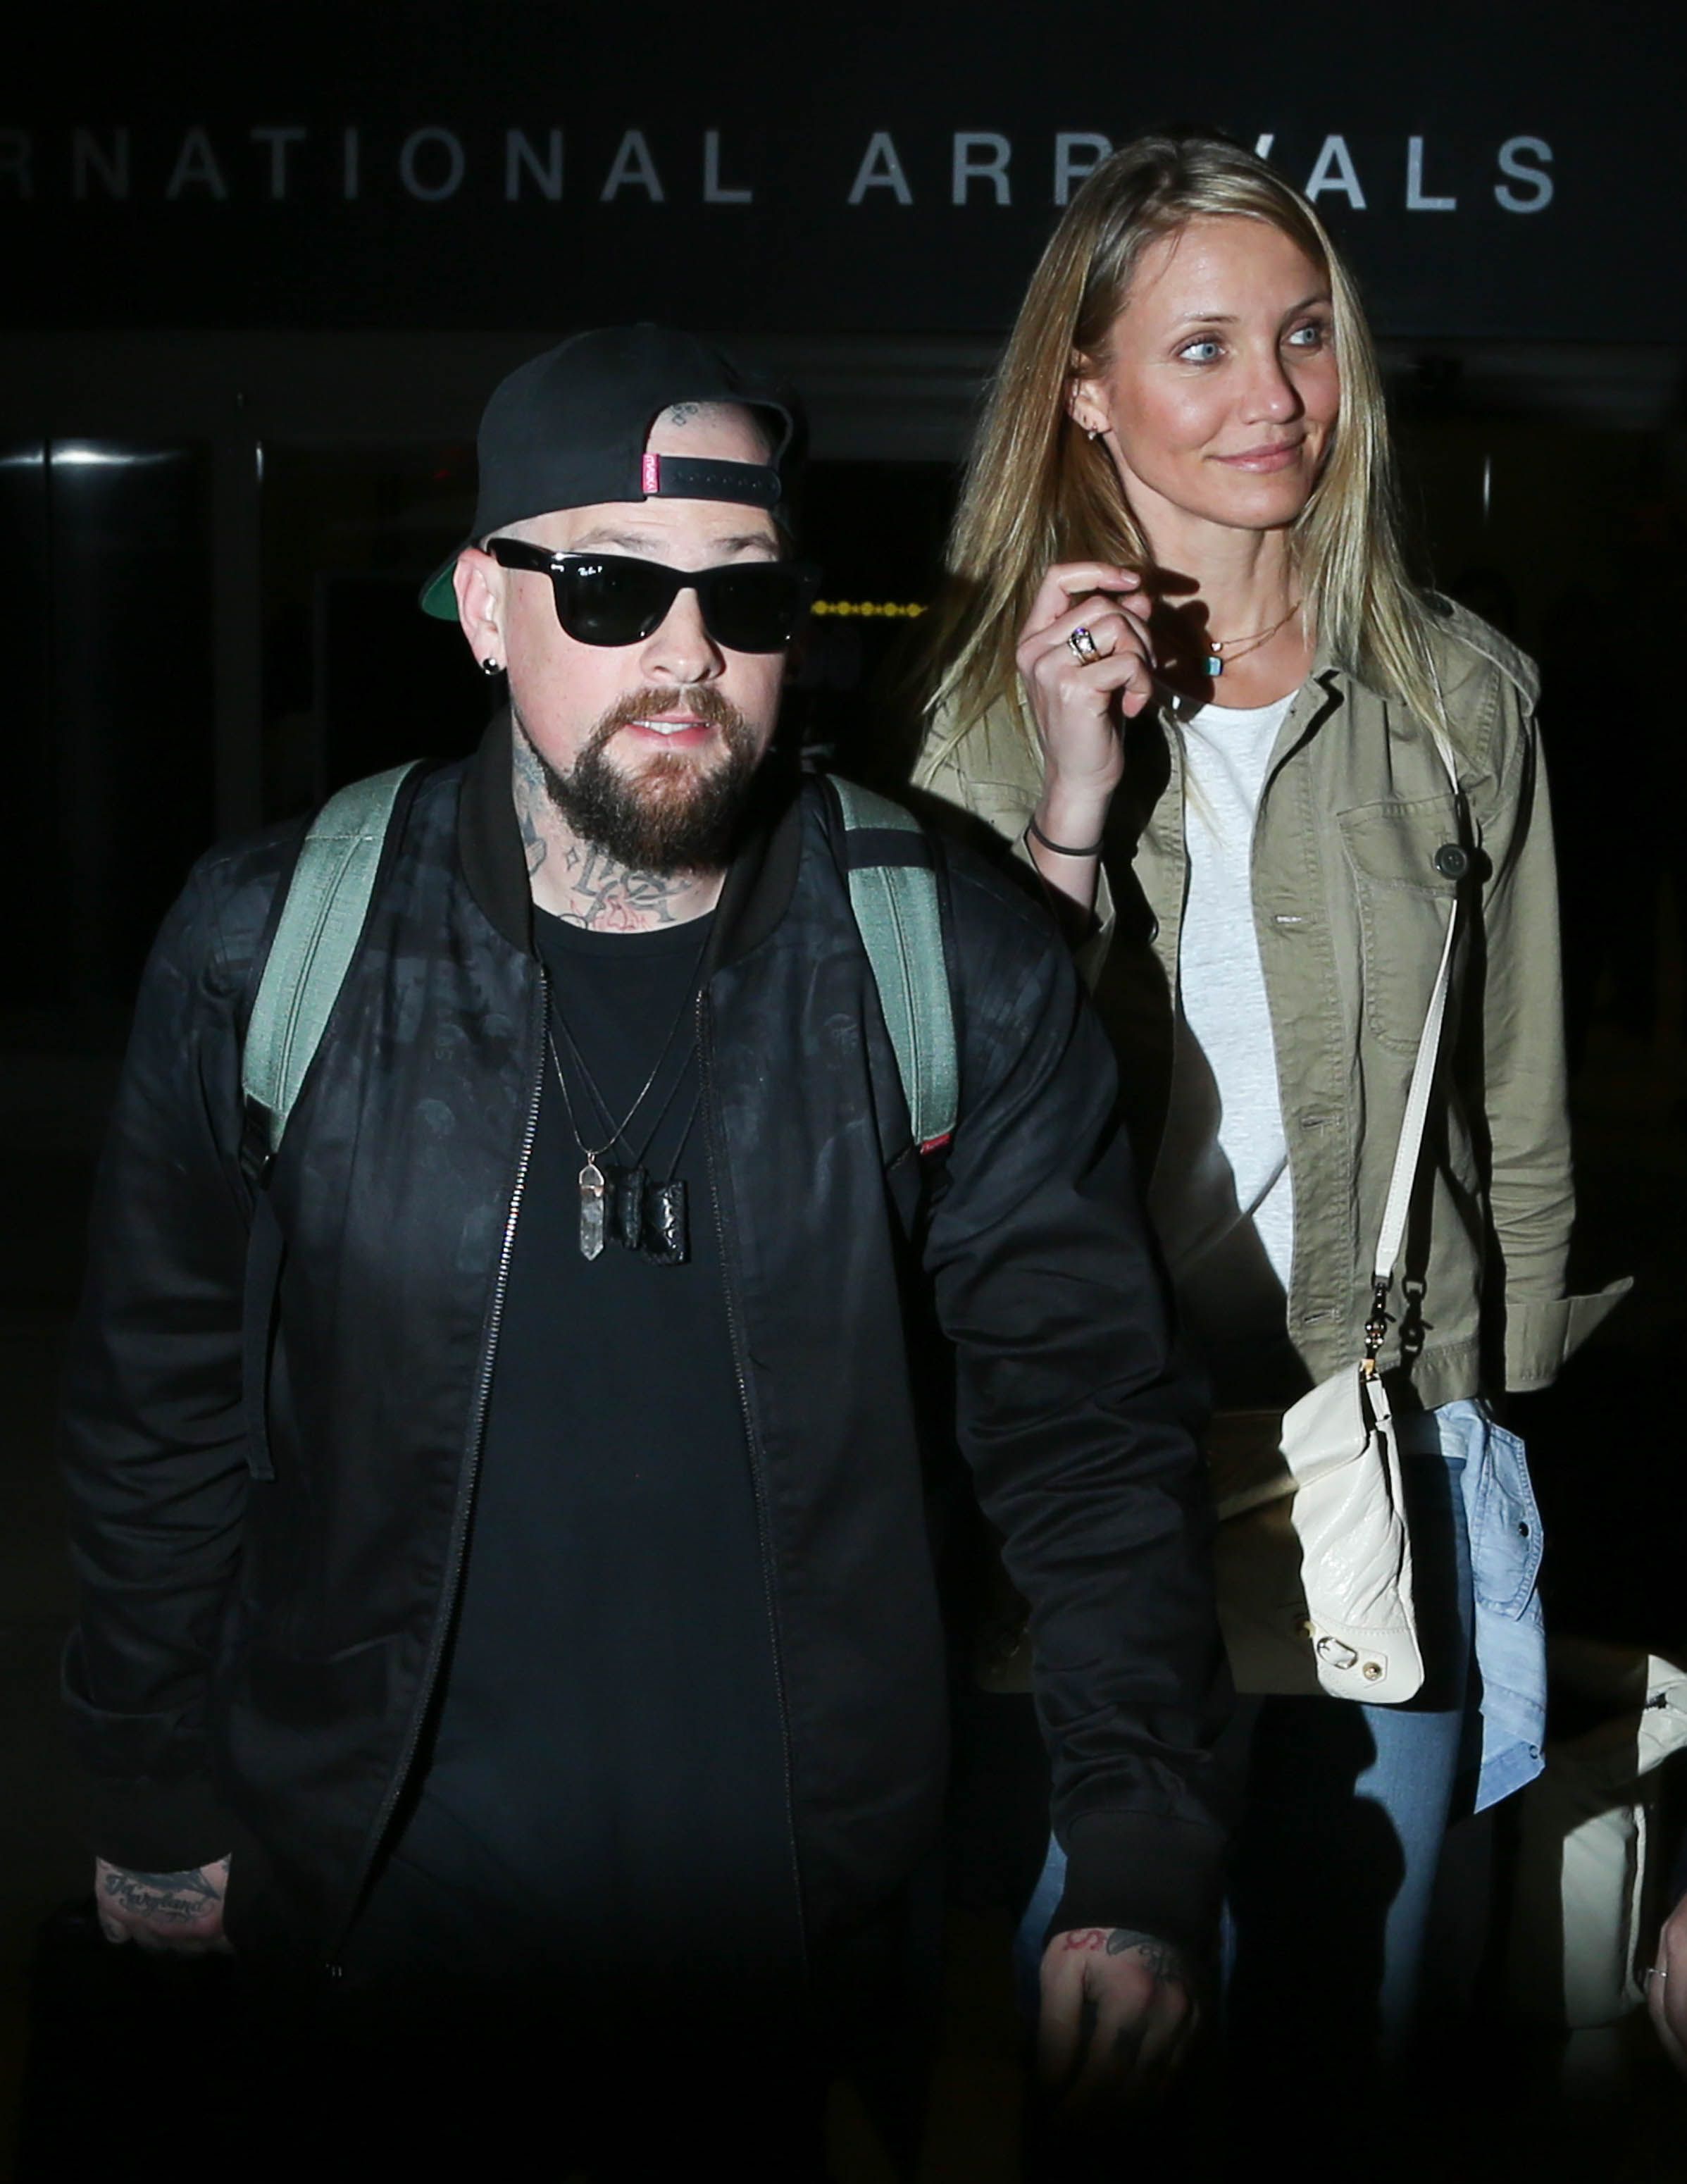 Cameron Diaz and Benji Madden at LAX on August 31, 2015, in Los Angeles, California. | Source: Getty Images